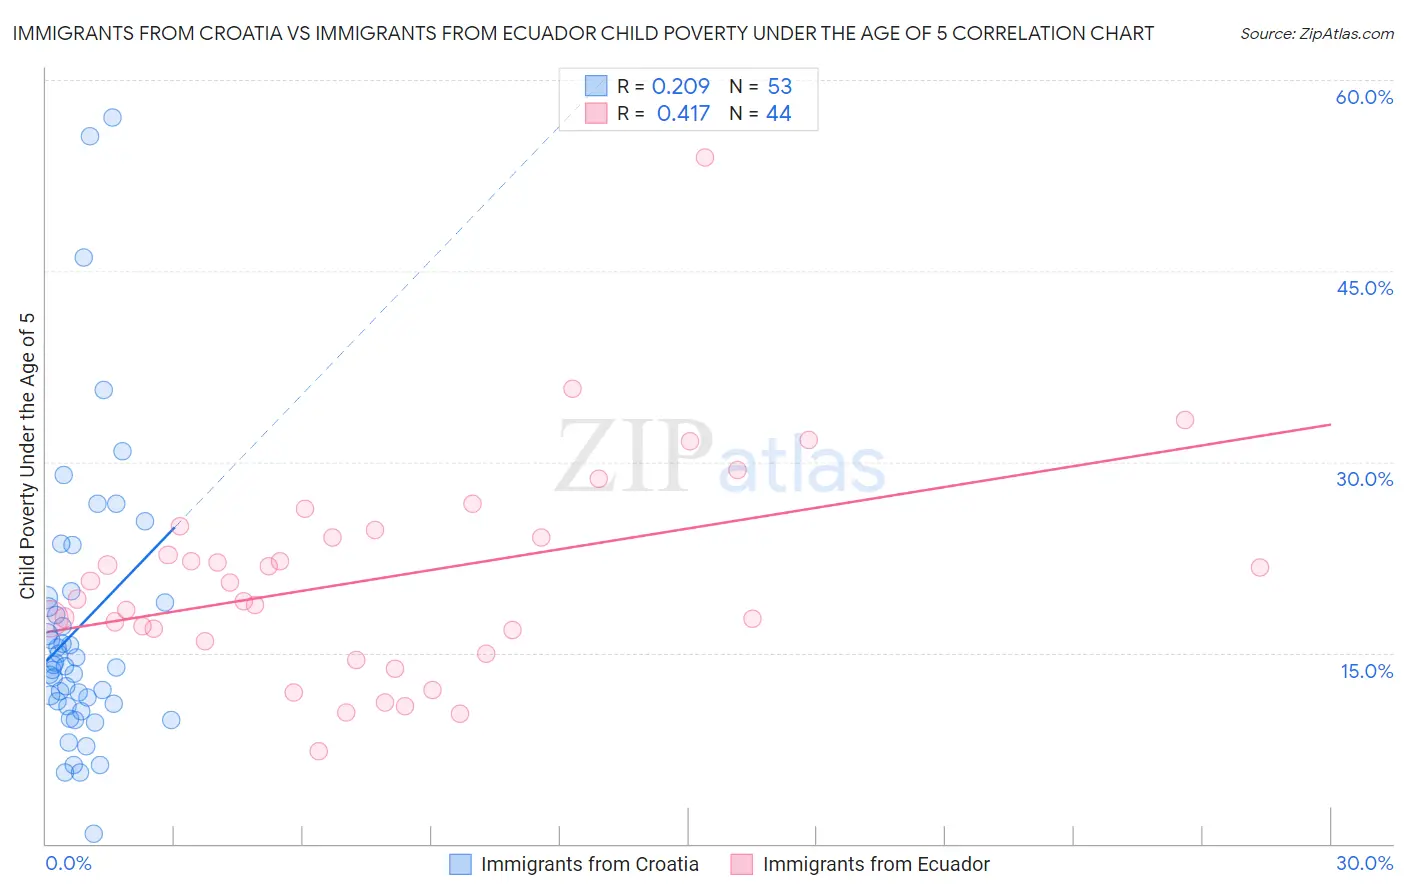 Immigrants from Croatia vs Immigrants from Ecuador Child Poverty Under the Age of 5